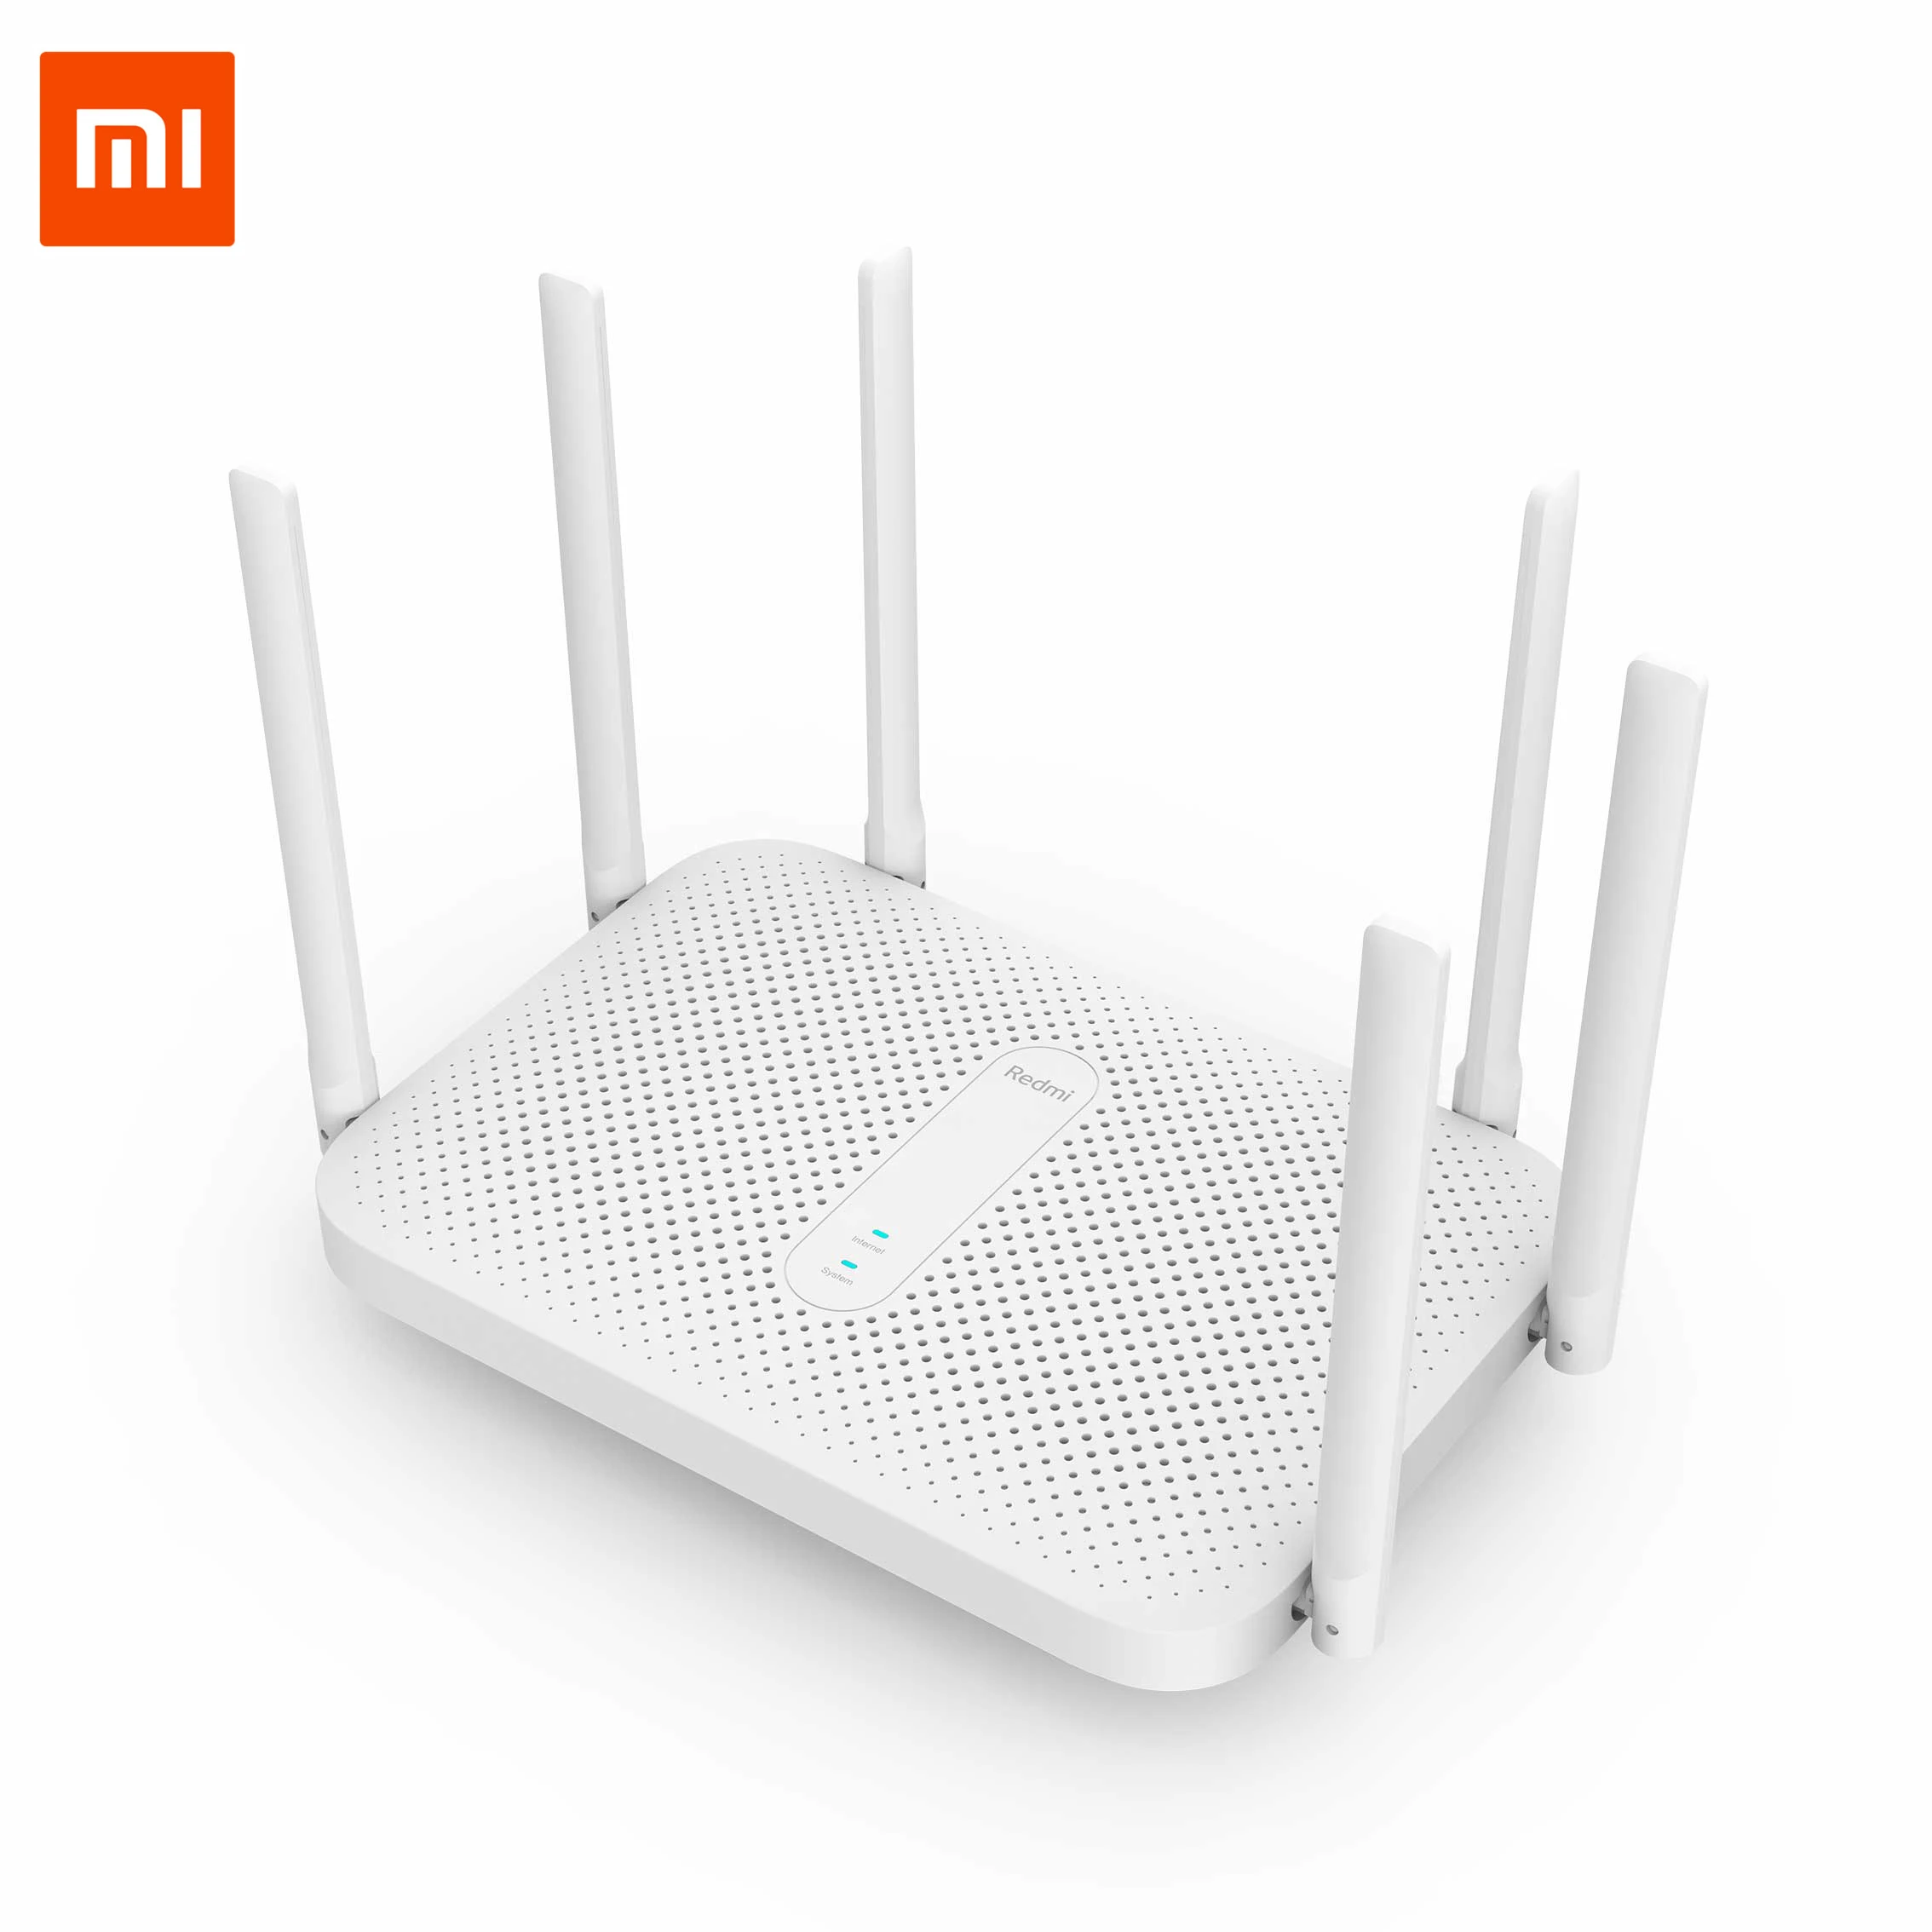 Xiaomi Redmi AC2100 Router Gigabit Dual-Band Wireless Router Wifi Repeater with 6 High Gain Antennas Wider Coverage Easy setup